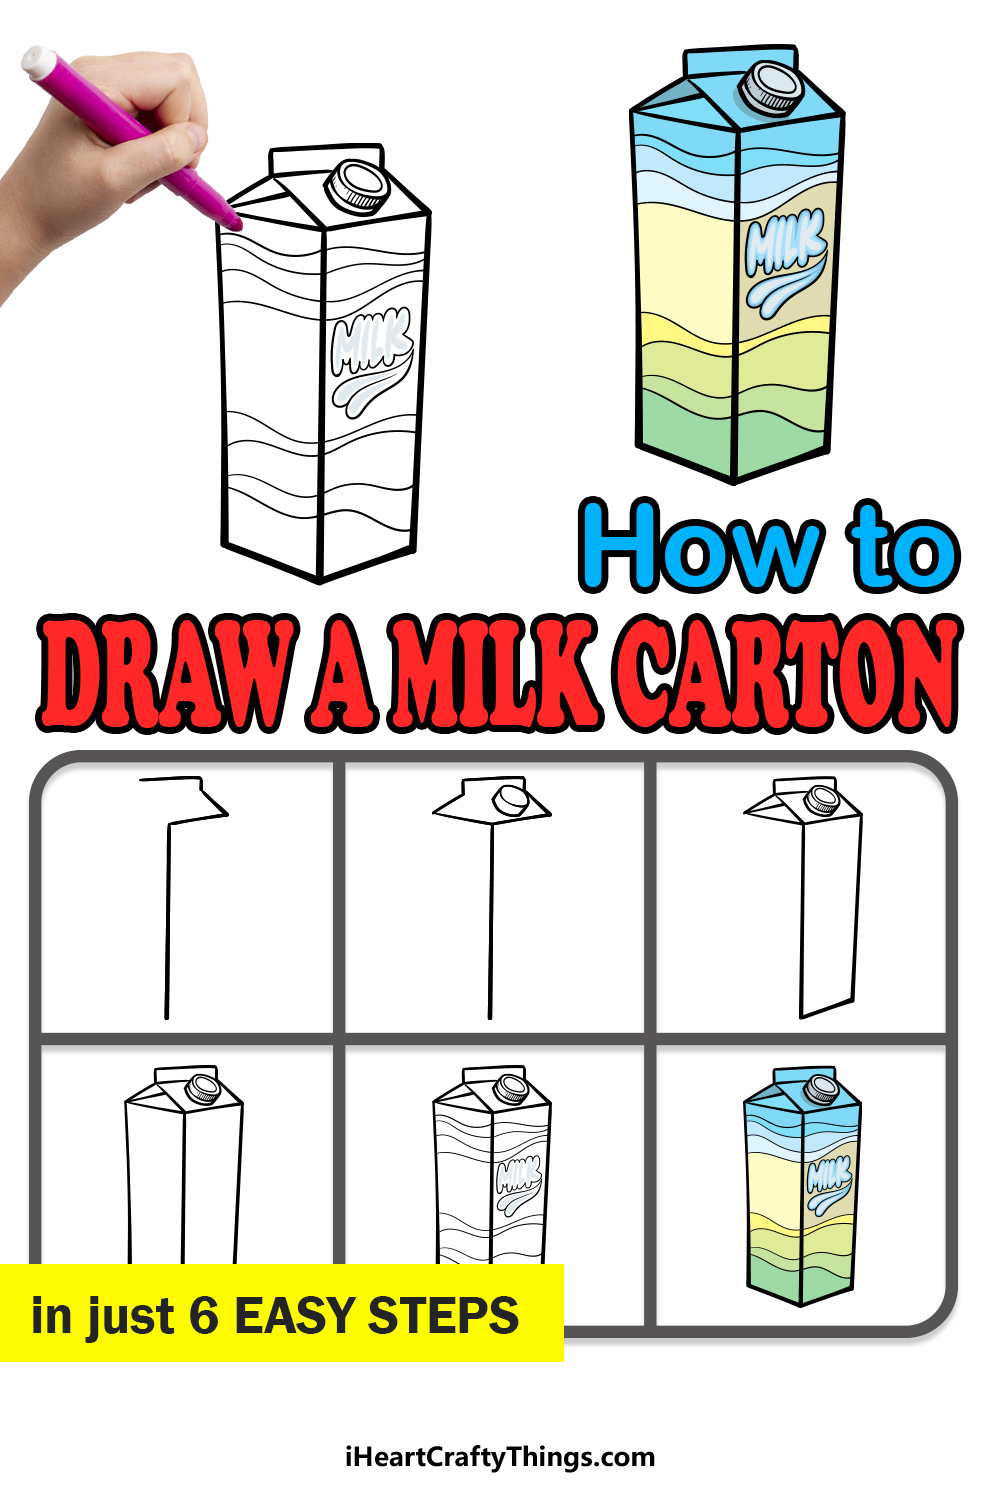 how to draw a milk carton in 6 easy steps